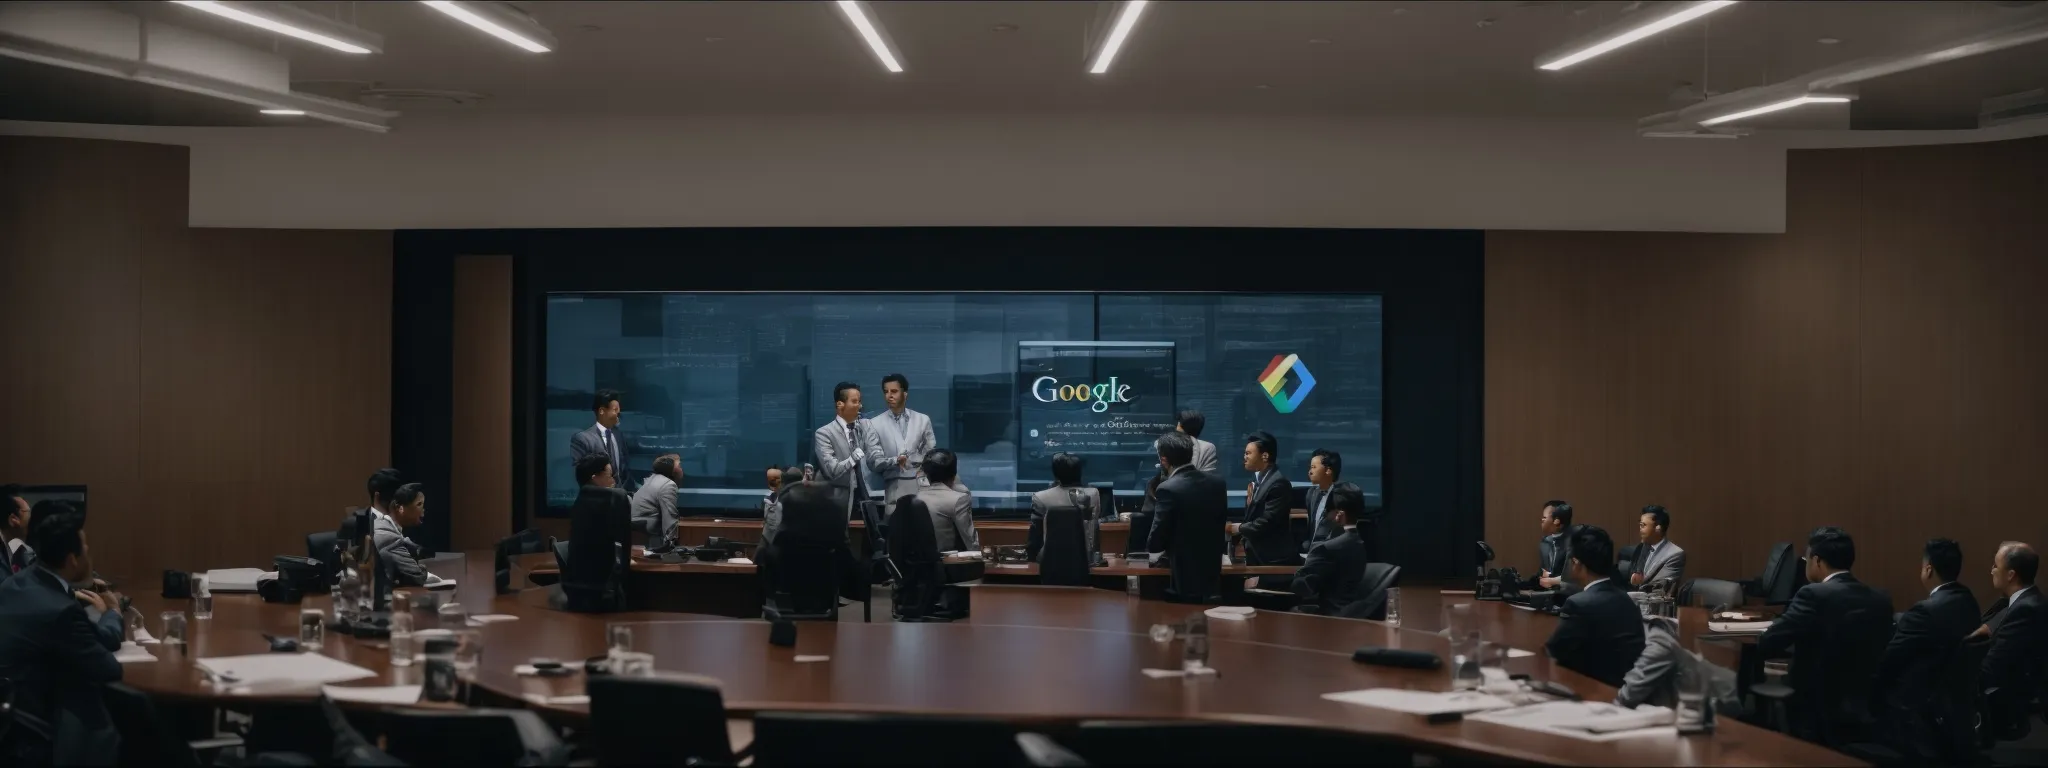 a conference room with officials seated around a table, deep in discussion with a large screen displaying the google logo visible in the background.